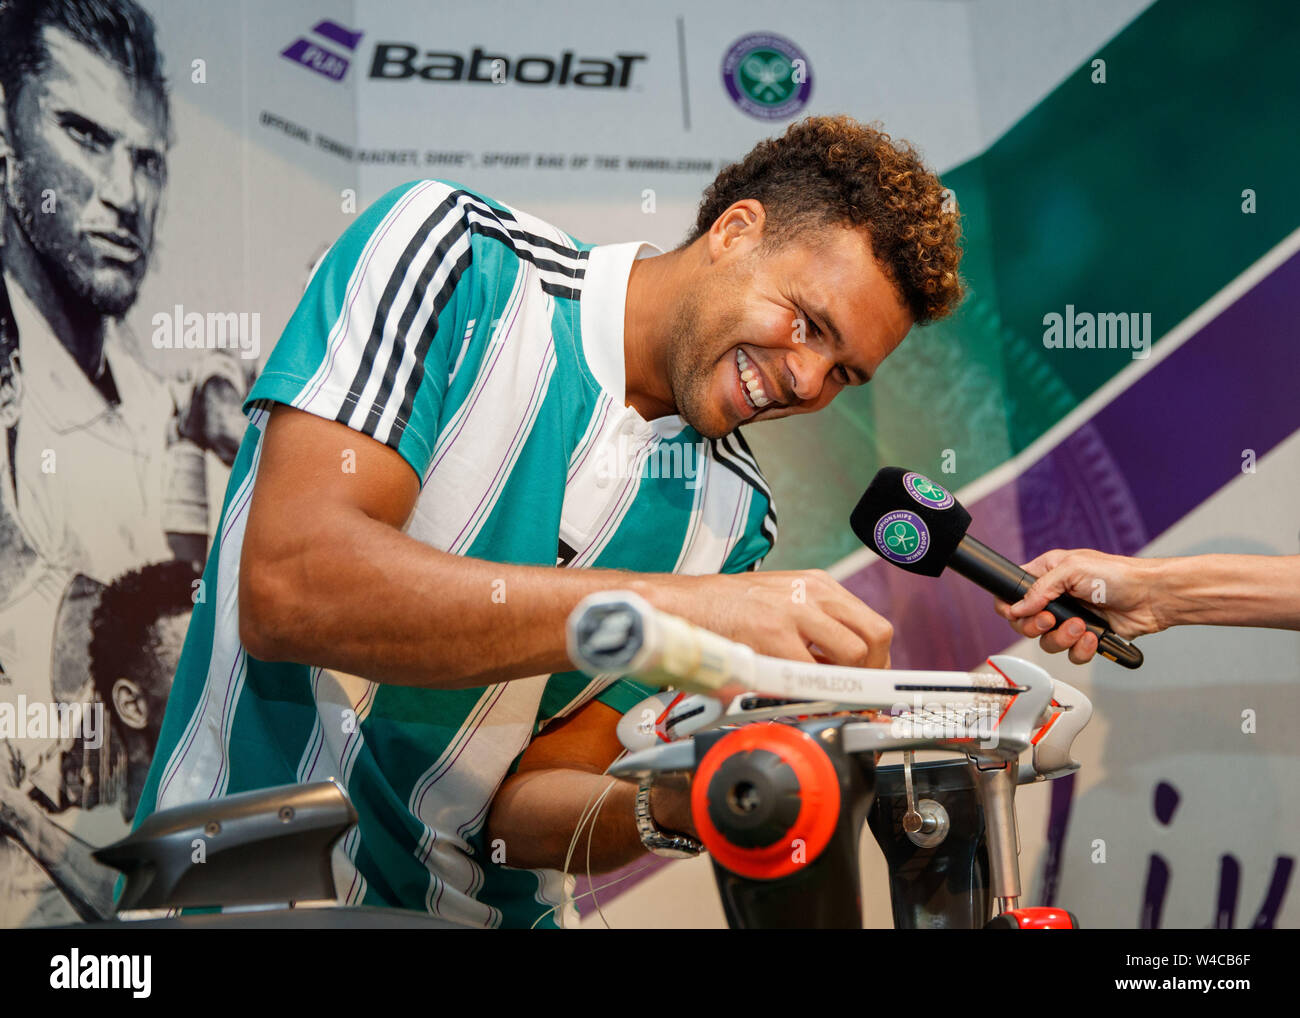 Jo-Wilfred Tsonga stringing a racket at The Wimbledon Championships 2019. Held at The All England Lawn Tennis Club, Wimbledon. Stock Photo